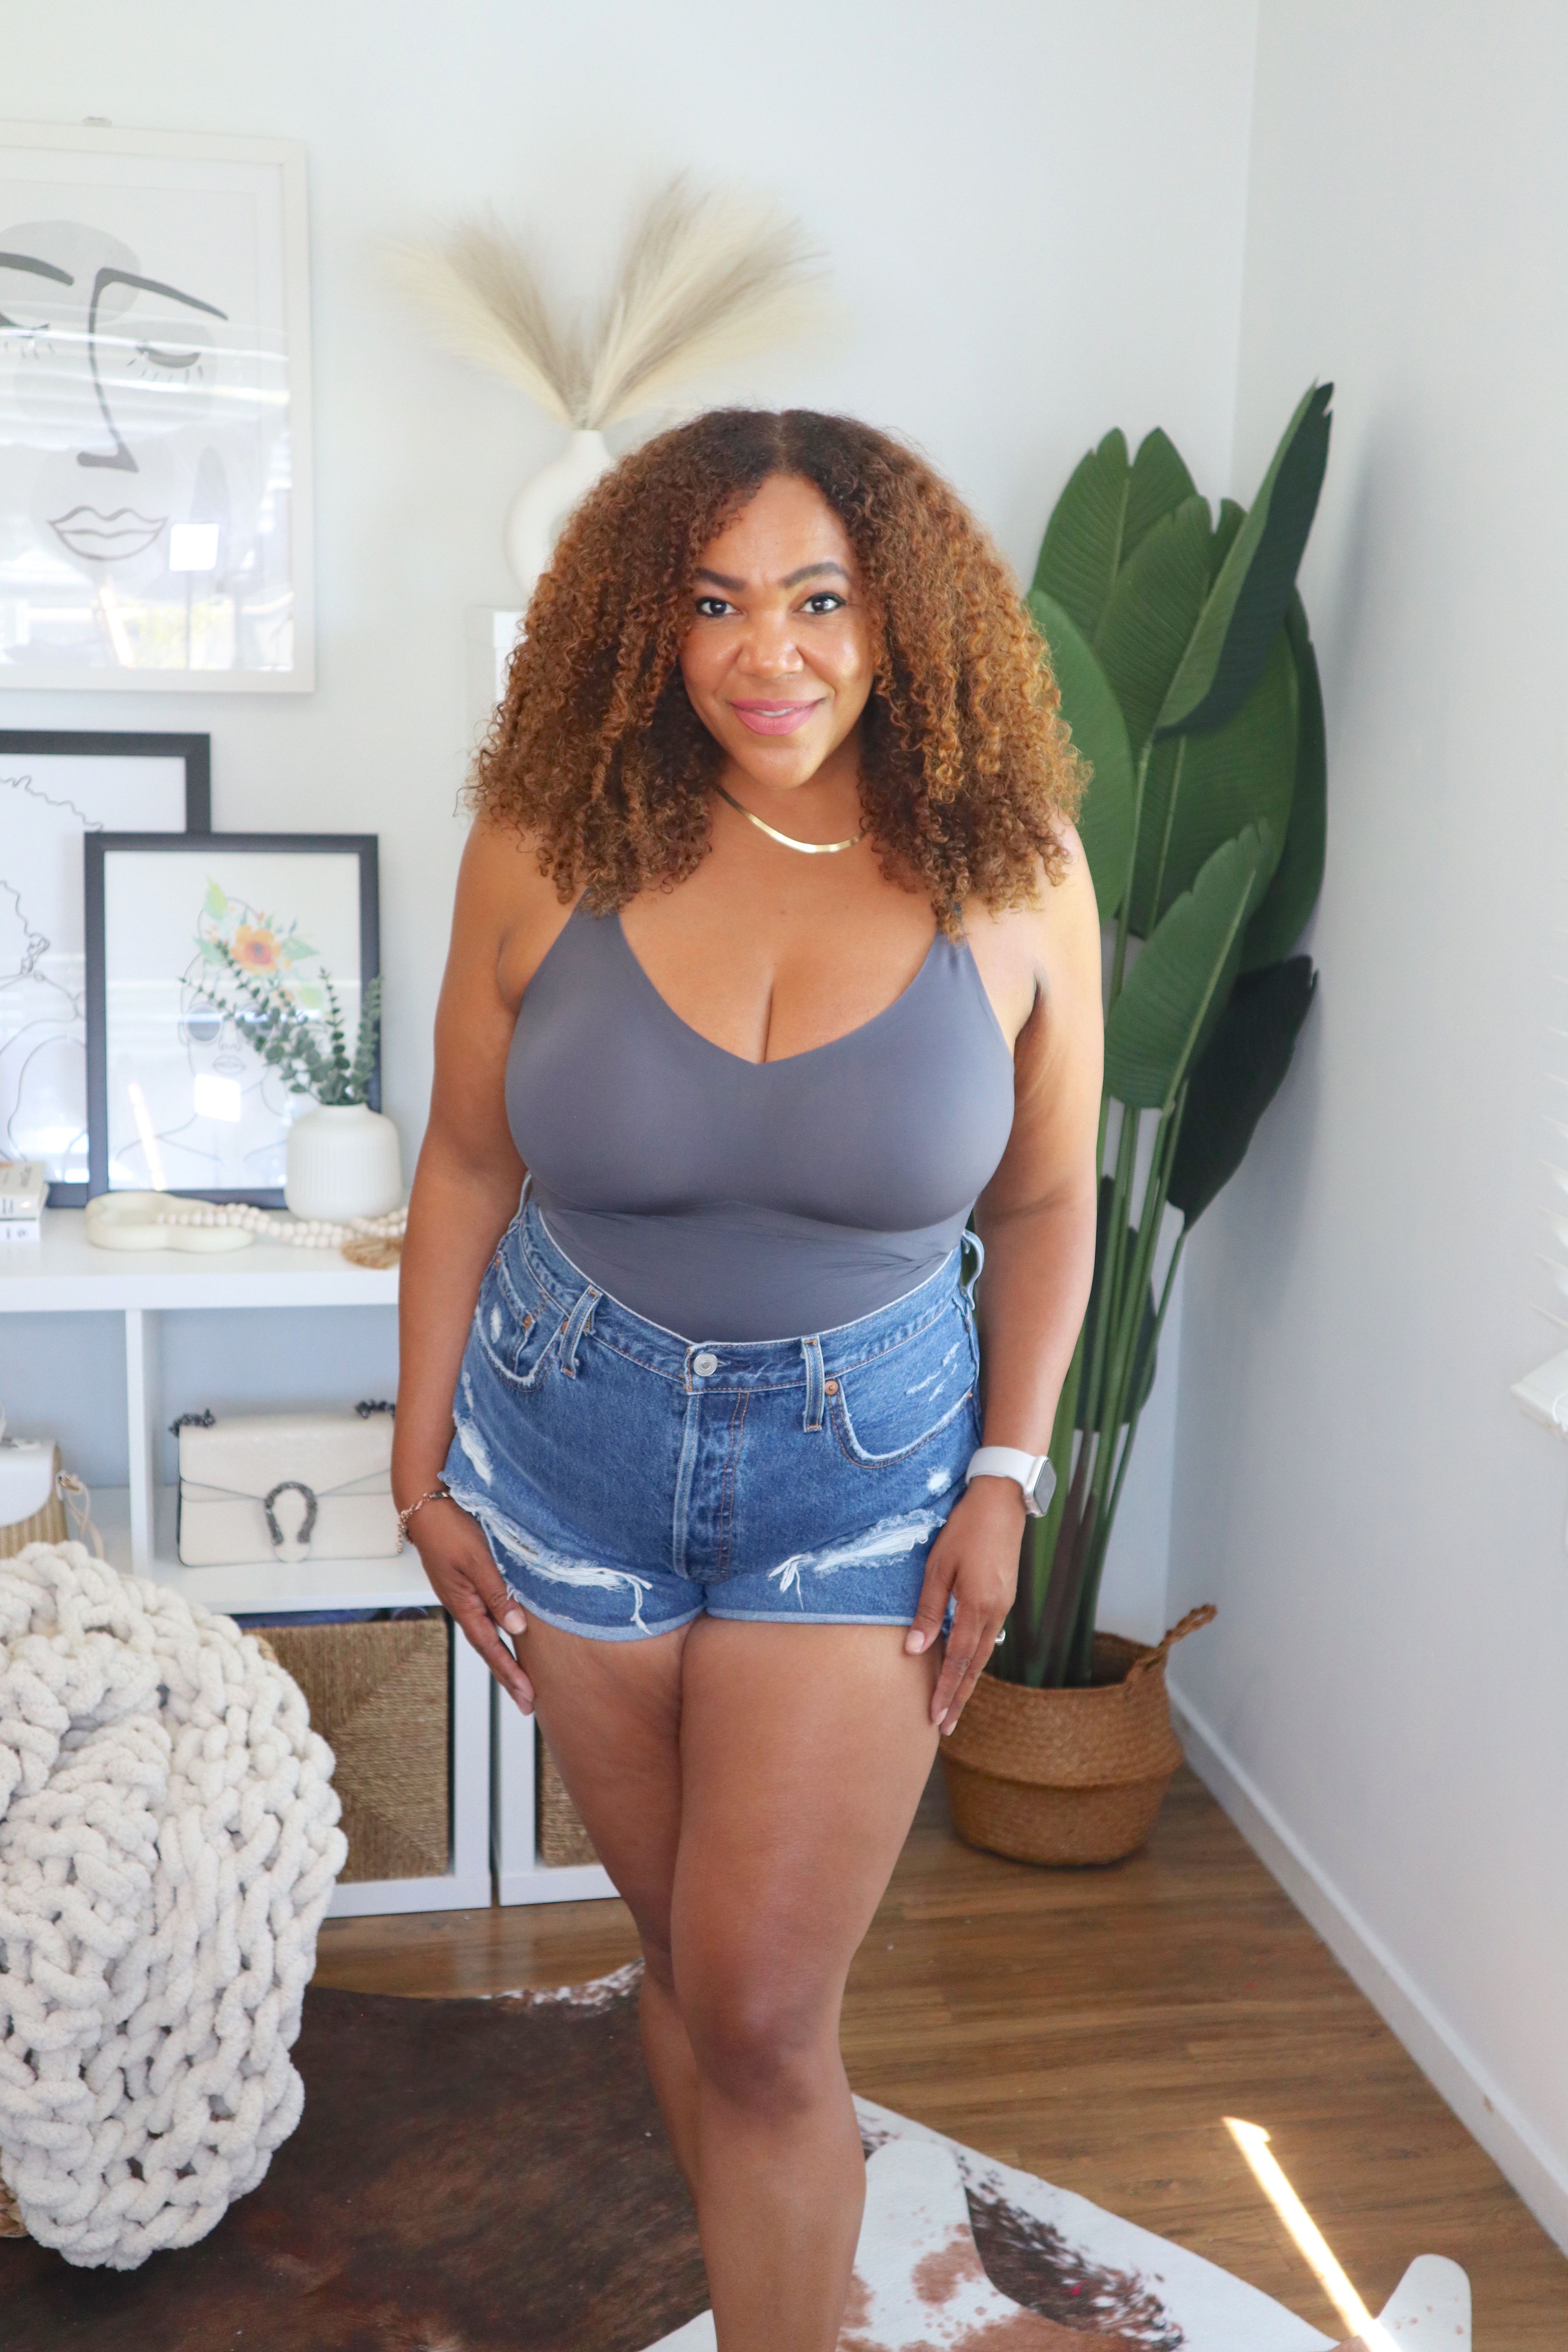 Honeylove shapewear review from a midlifer - Elle Muse